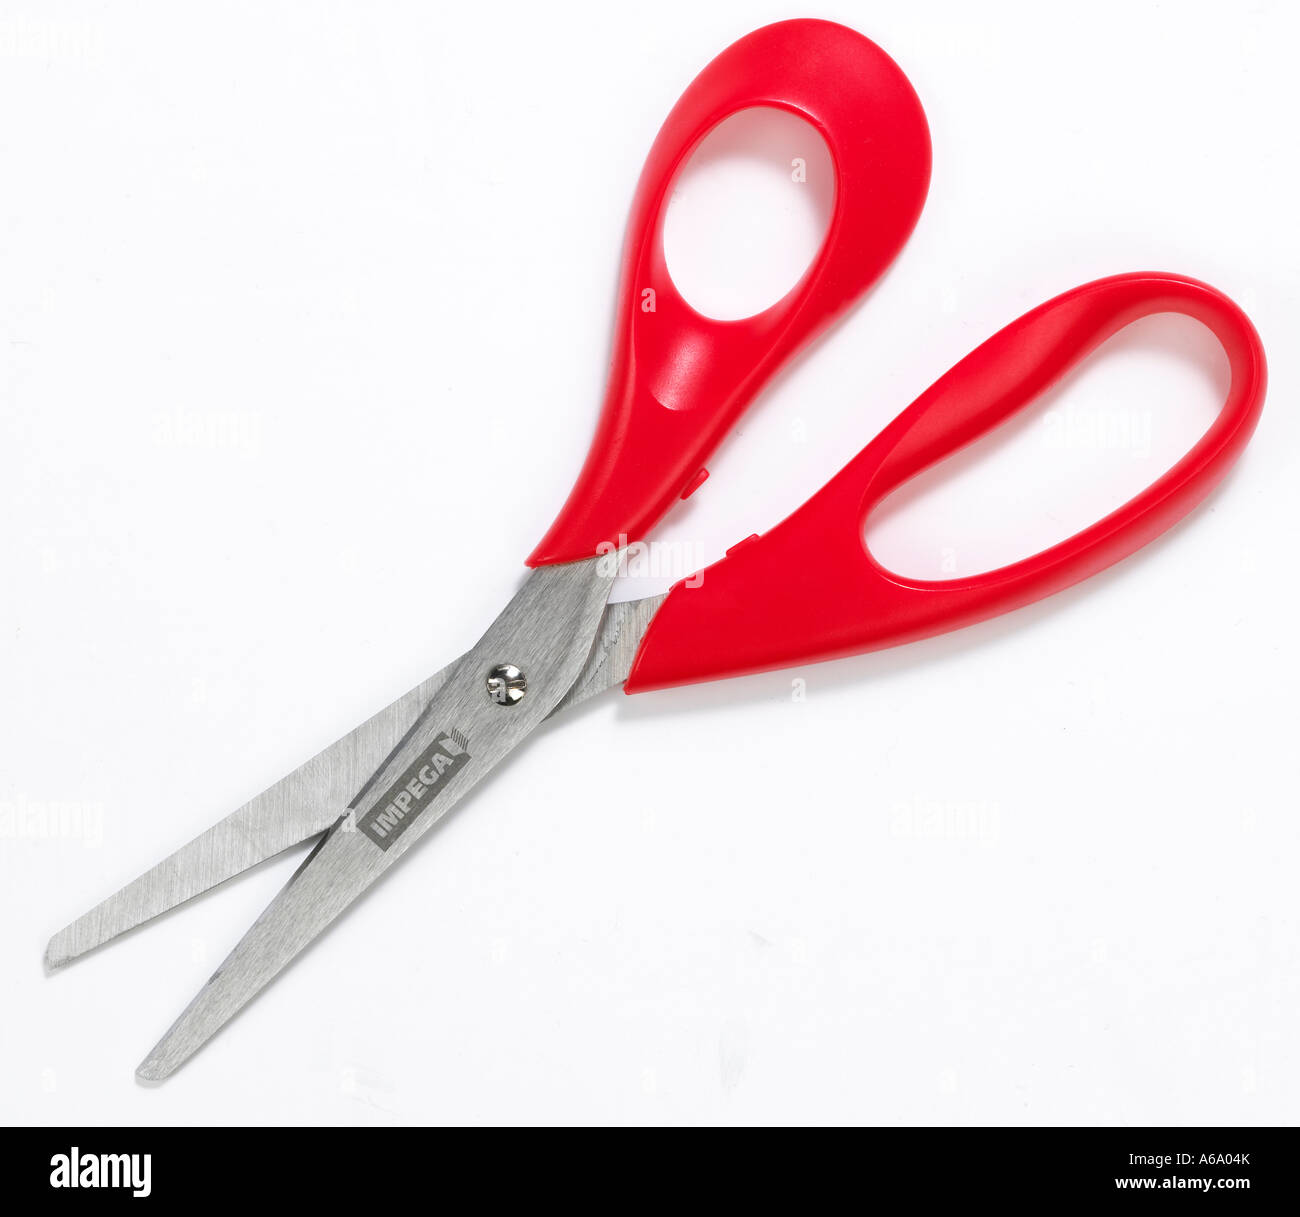 scissors slightly open with a red handle on a white background Stock Photo